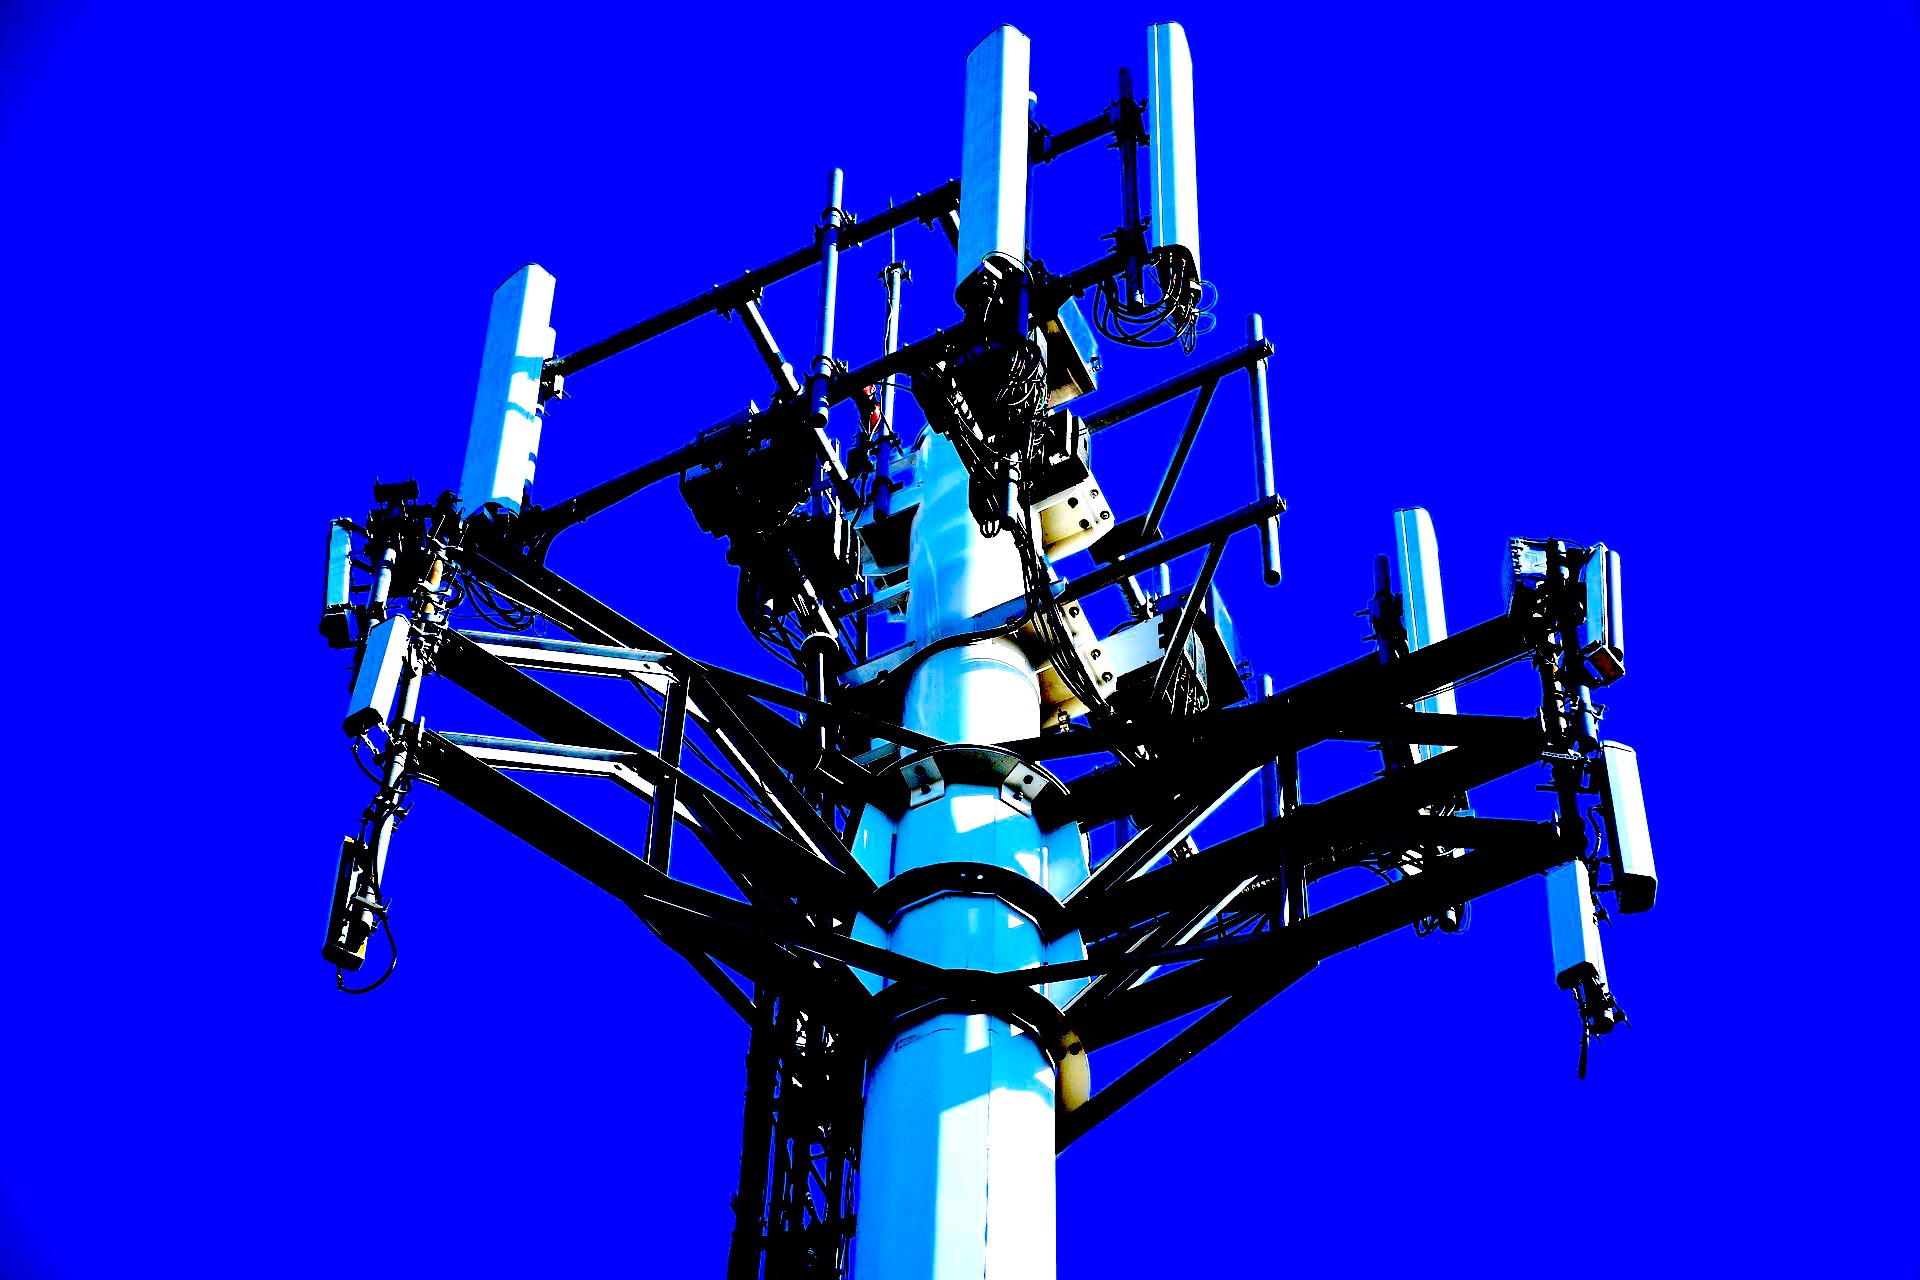 An open standard threatens to disrupt the cloistered world of wireless networking